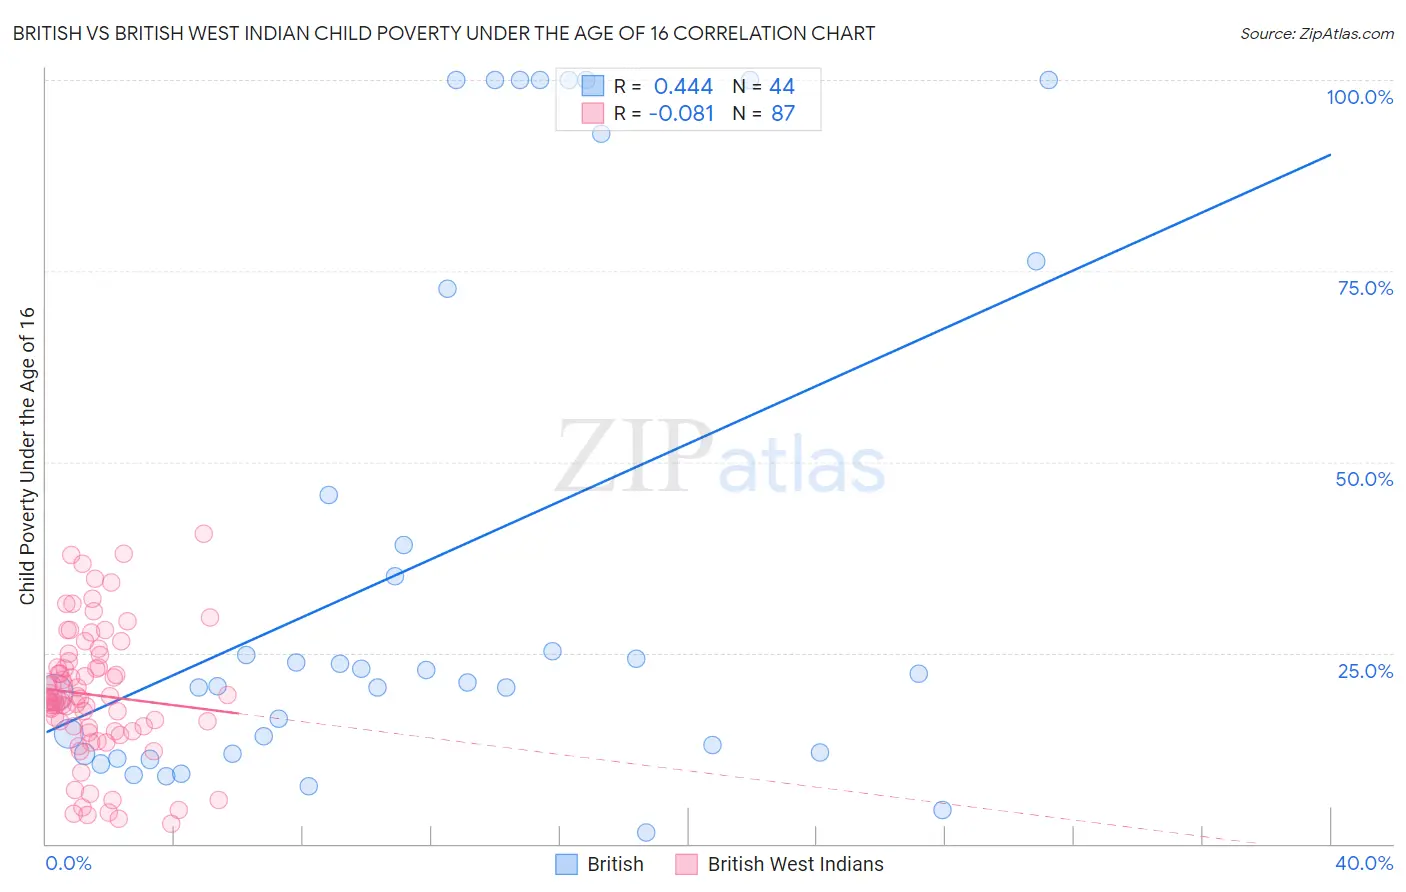 British vs British West Indian Child Poverty Under the Age of 16